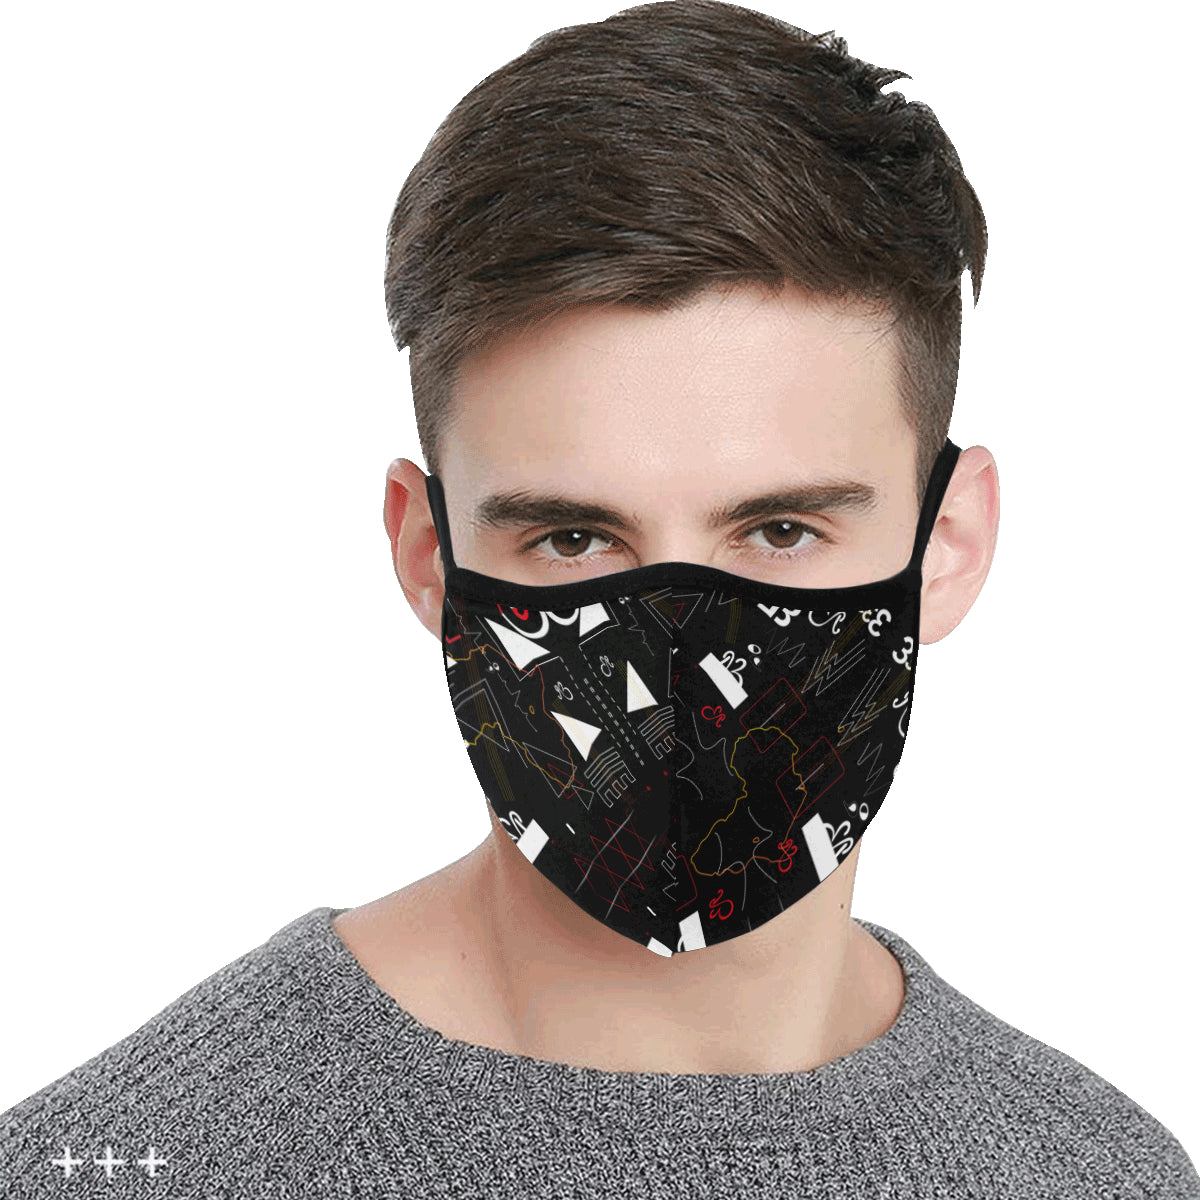 Linear Print Cotton Fabric Face Mask with filter slot (30 Filters Included) - Non-medical use